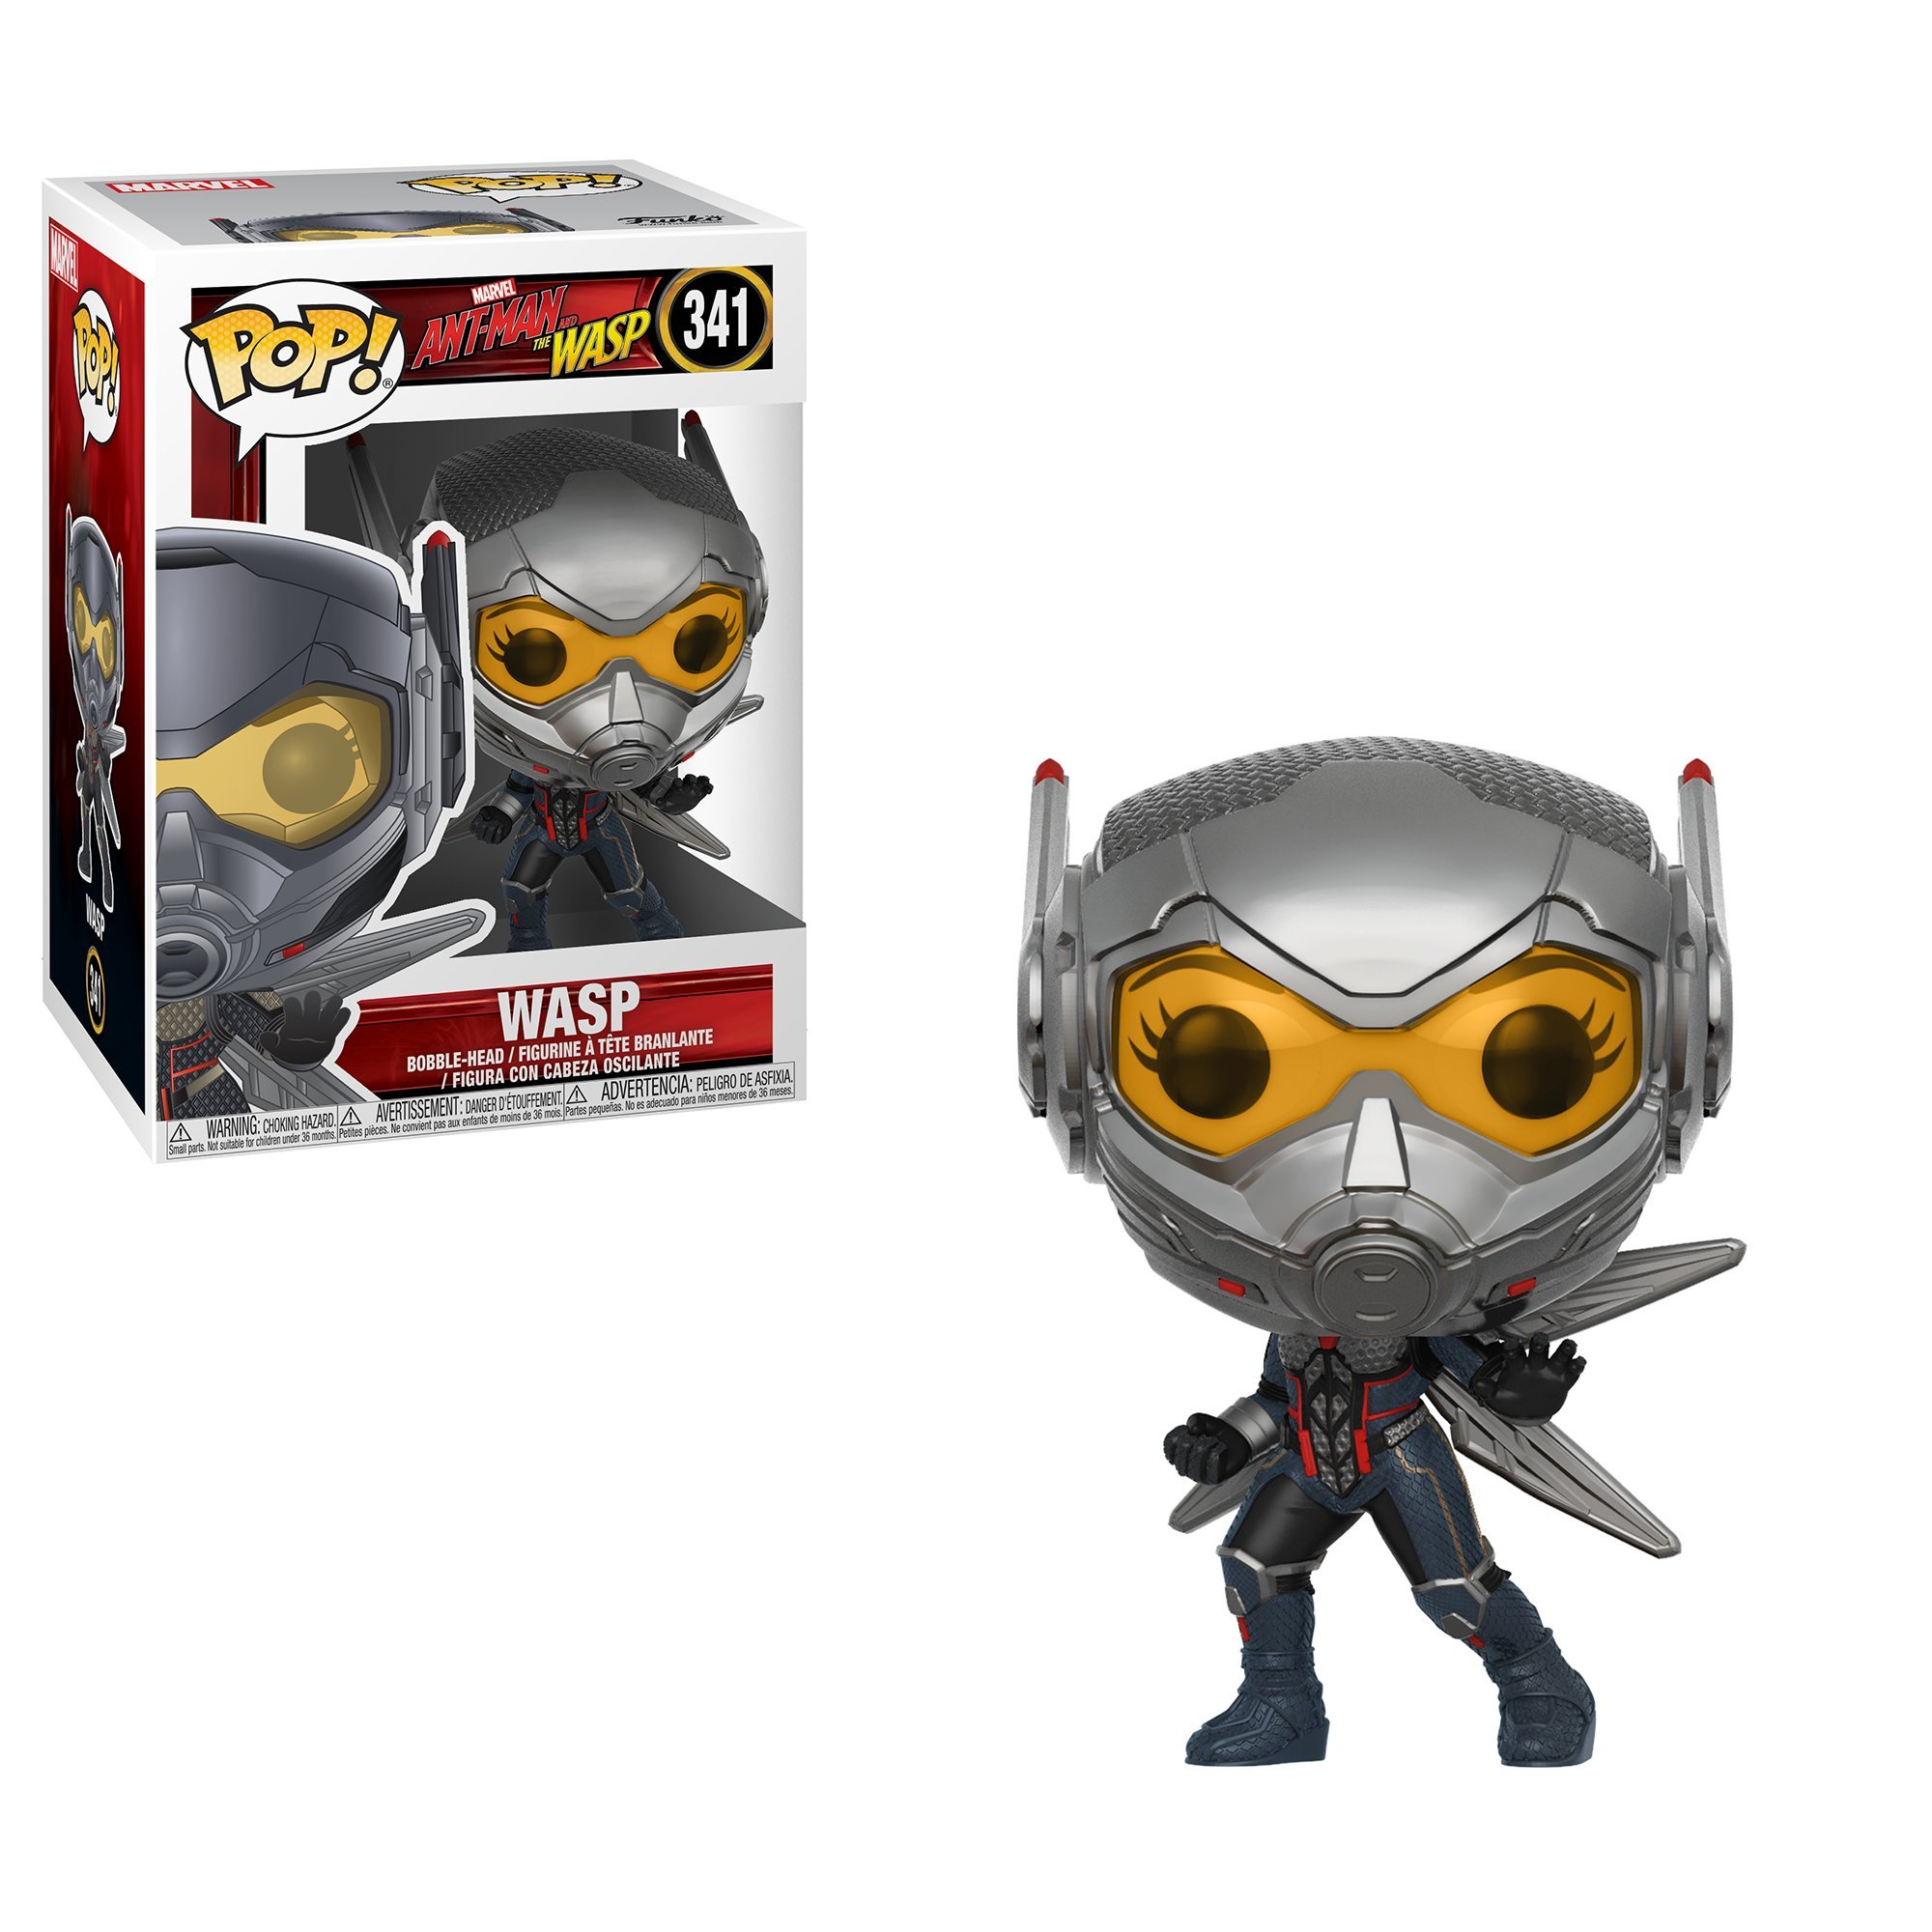 Funko Pop Marvel: Ant-Man & The Wasp - The Wasp Collectible Figure, Multicolor, Standard